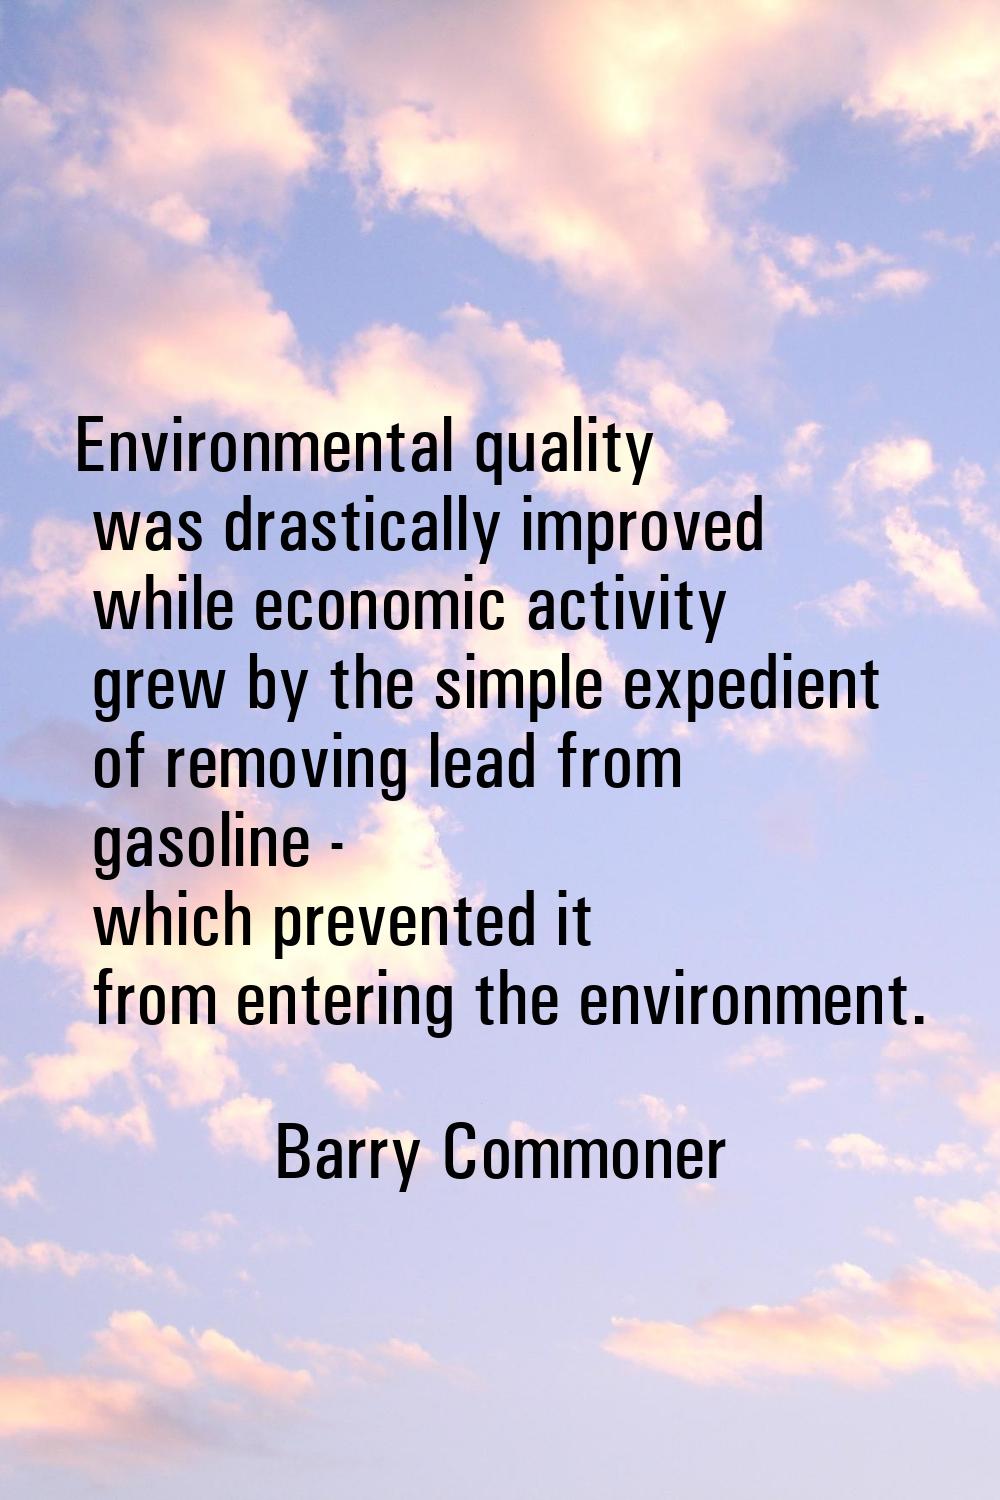 Environmental quality was drastically improved while economic activity grew by the simple expedient